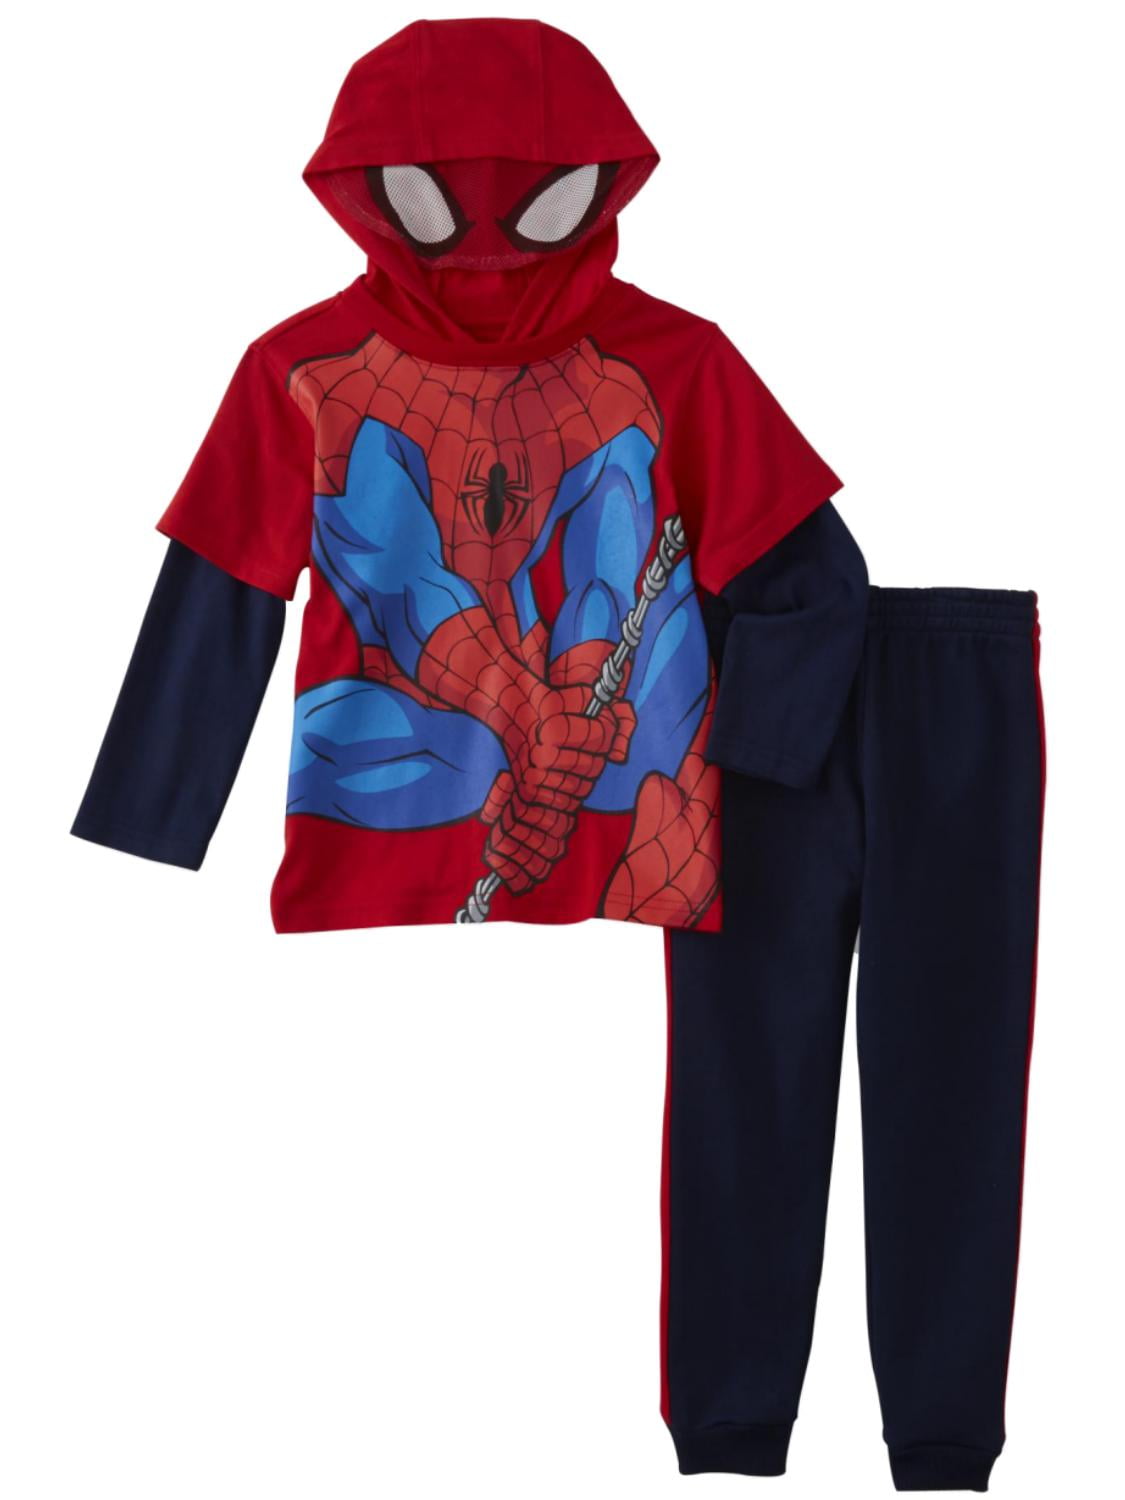 Pant Set Kids Clothes Outfits 2PCS Baby Boys Long Sleeve Spiderman Hoodies Top 